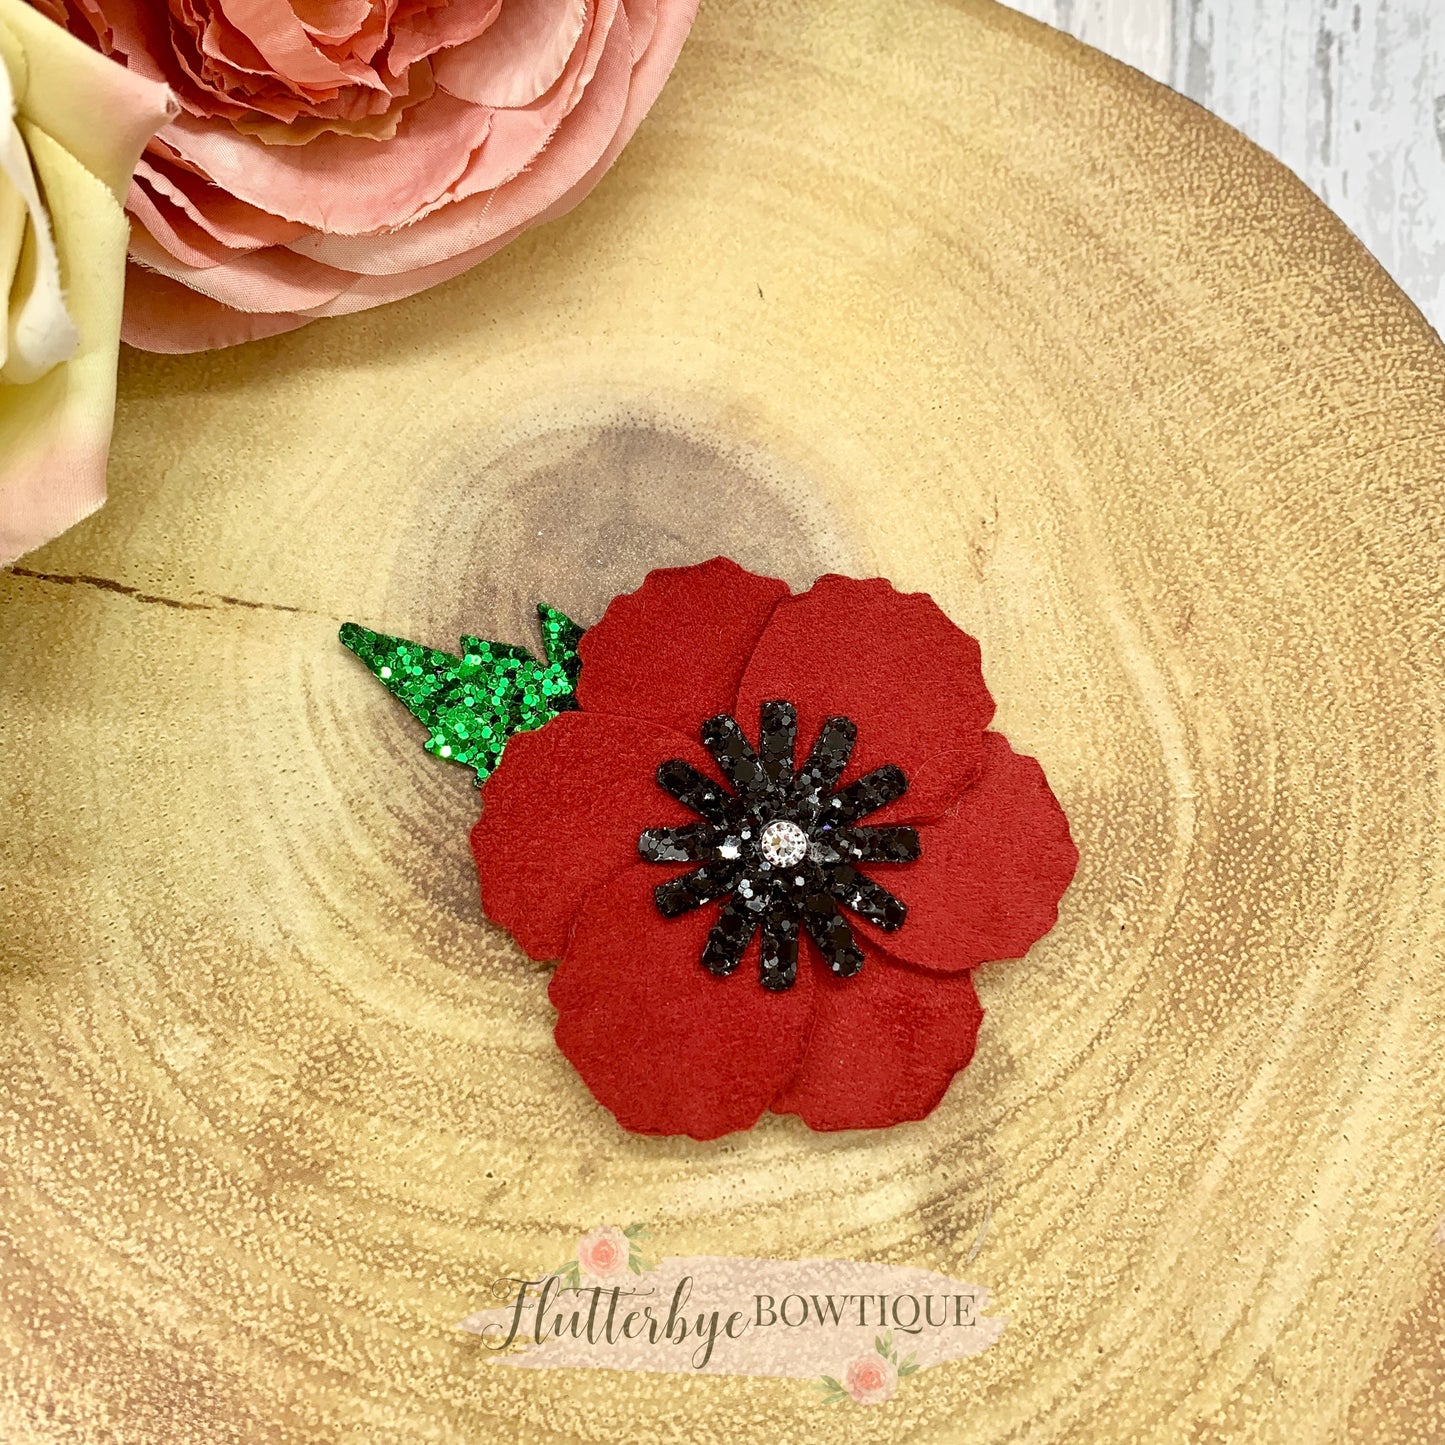 Poppy Remembrance Hair clip, Lest we forget broach